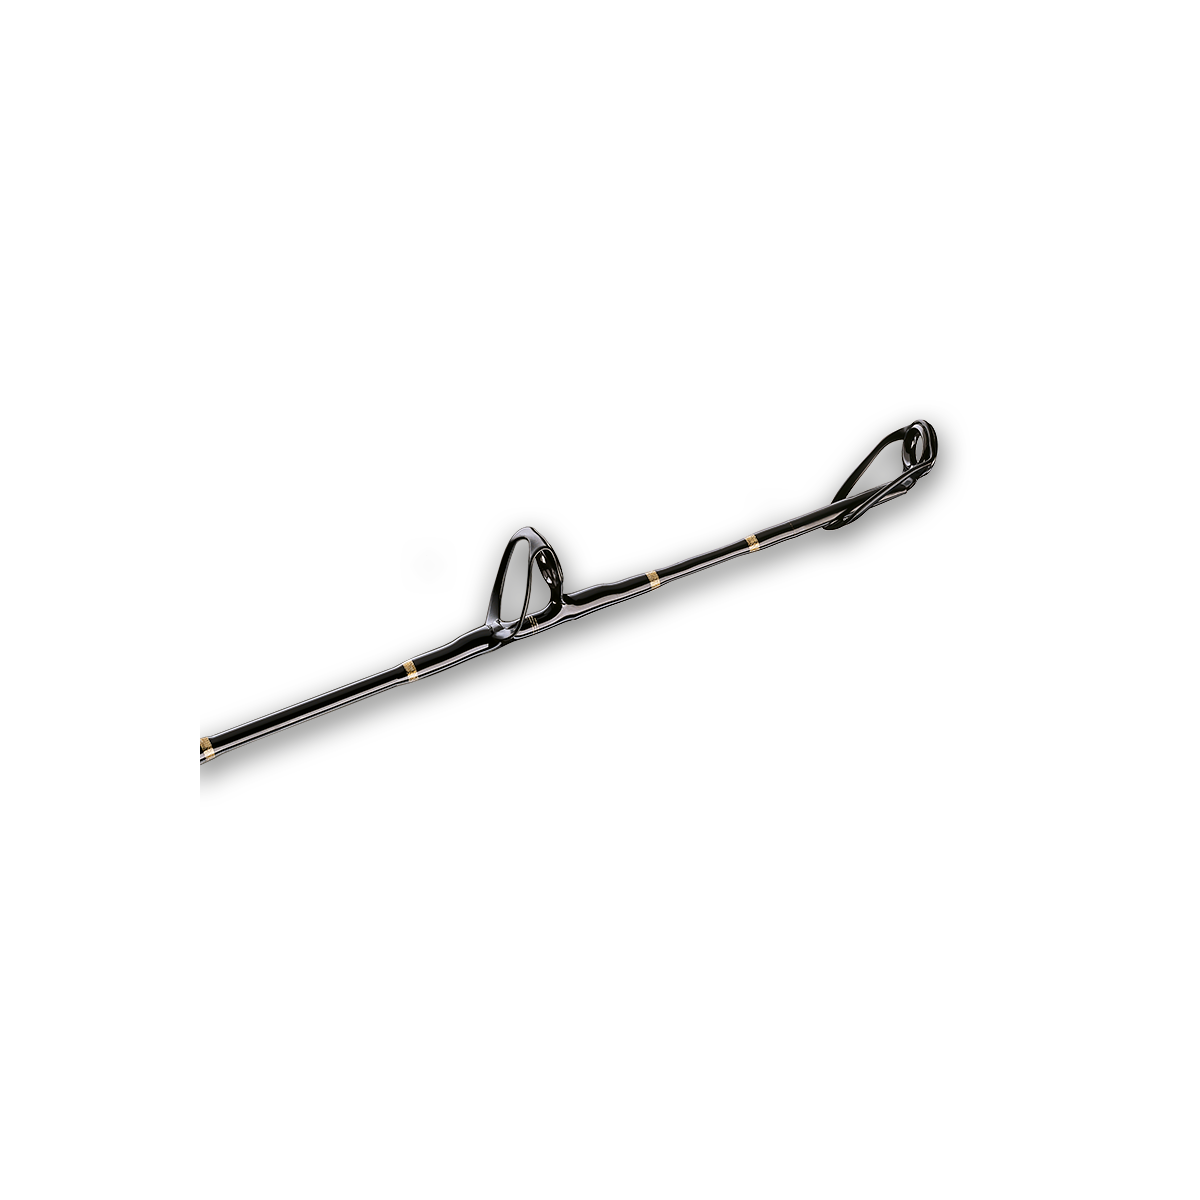 Alutecnos Albacore Stand-Up Rod / Guides